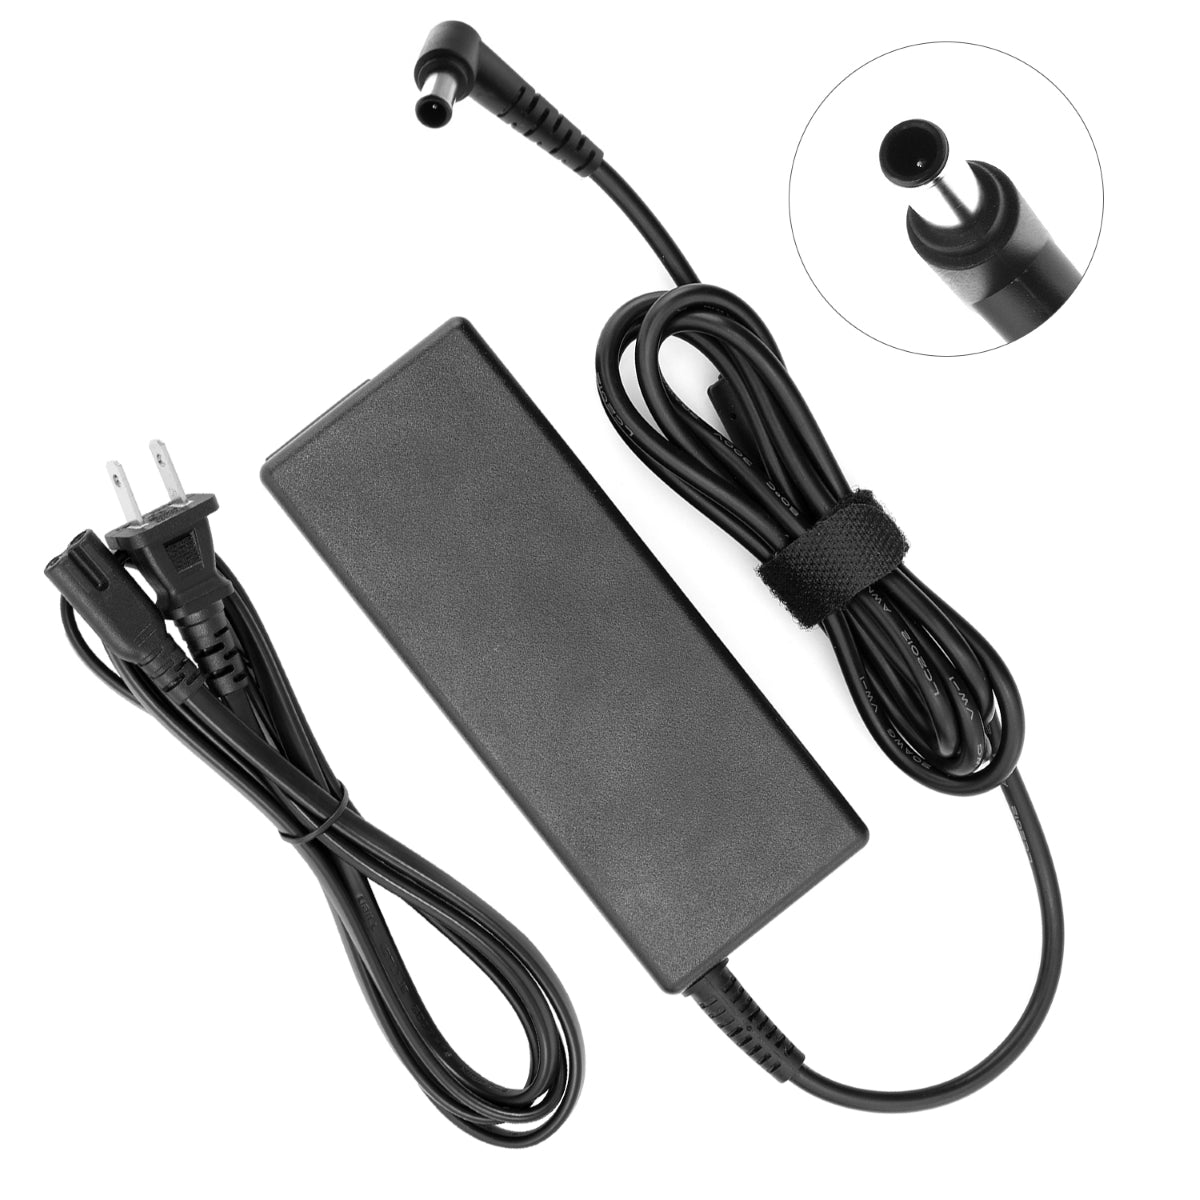 Power Adapter for LG 27GN880-B Monitor TV